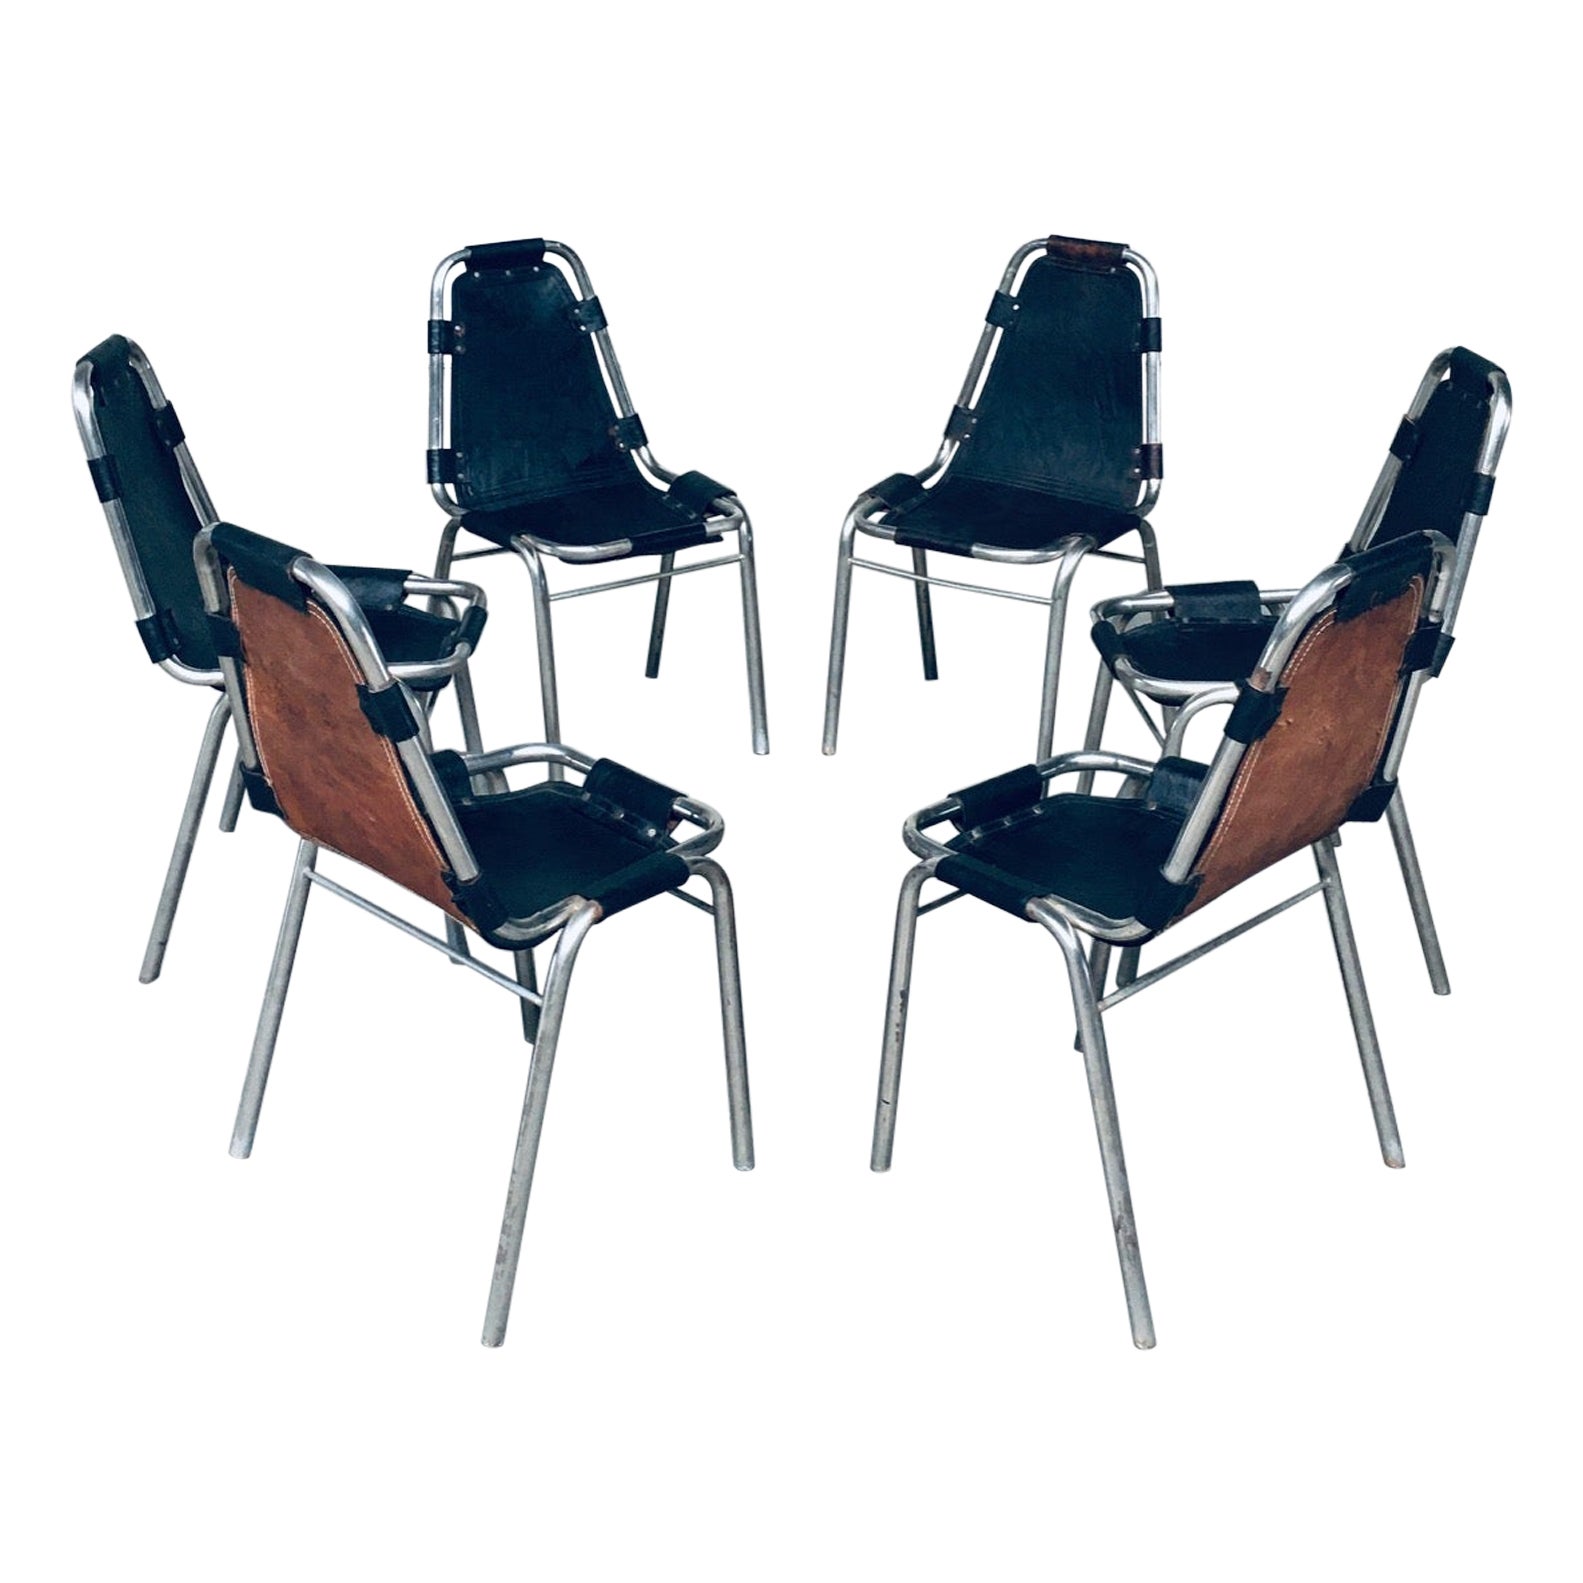 Industrial Design Leather and Steel Dining Chairs model "Les Arcs", 1980's